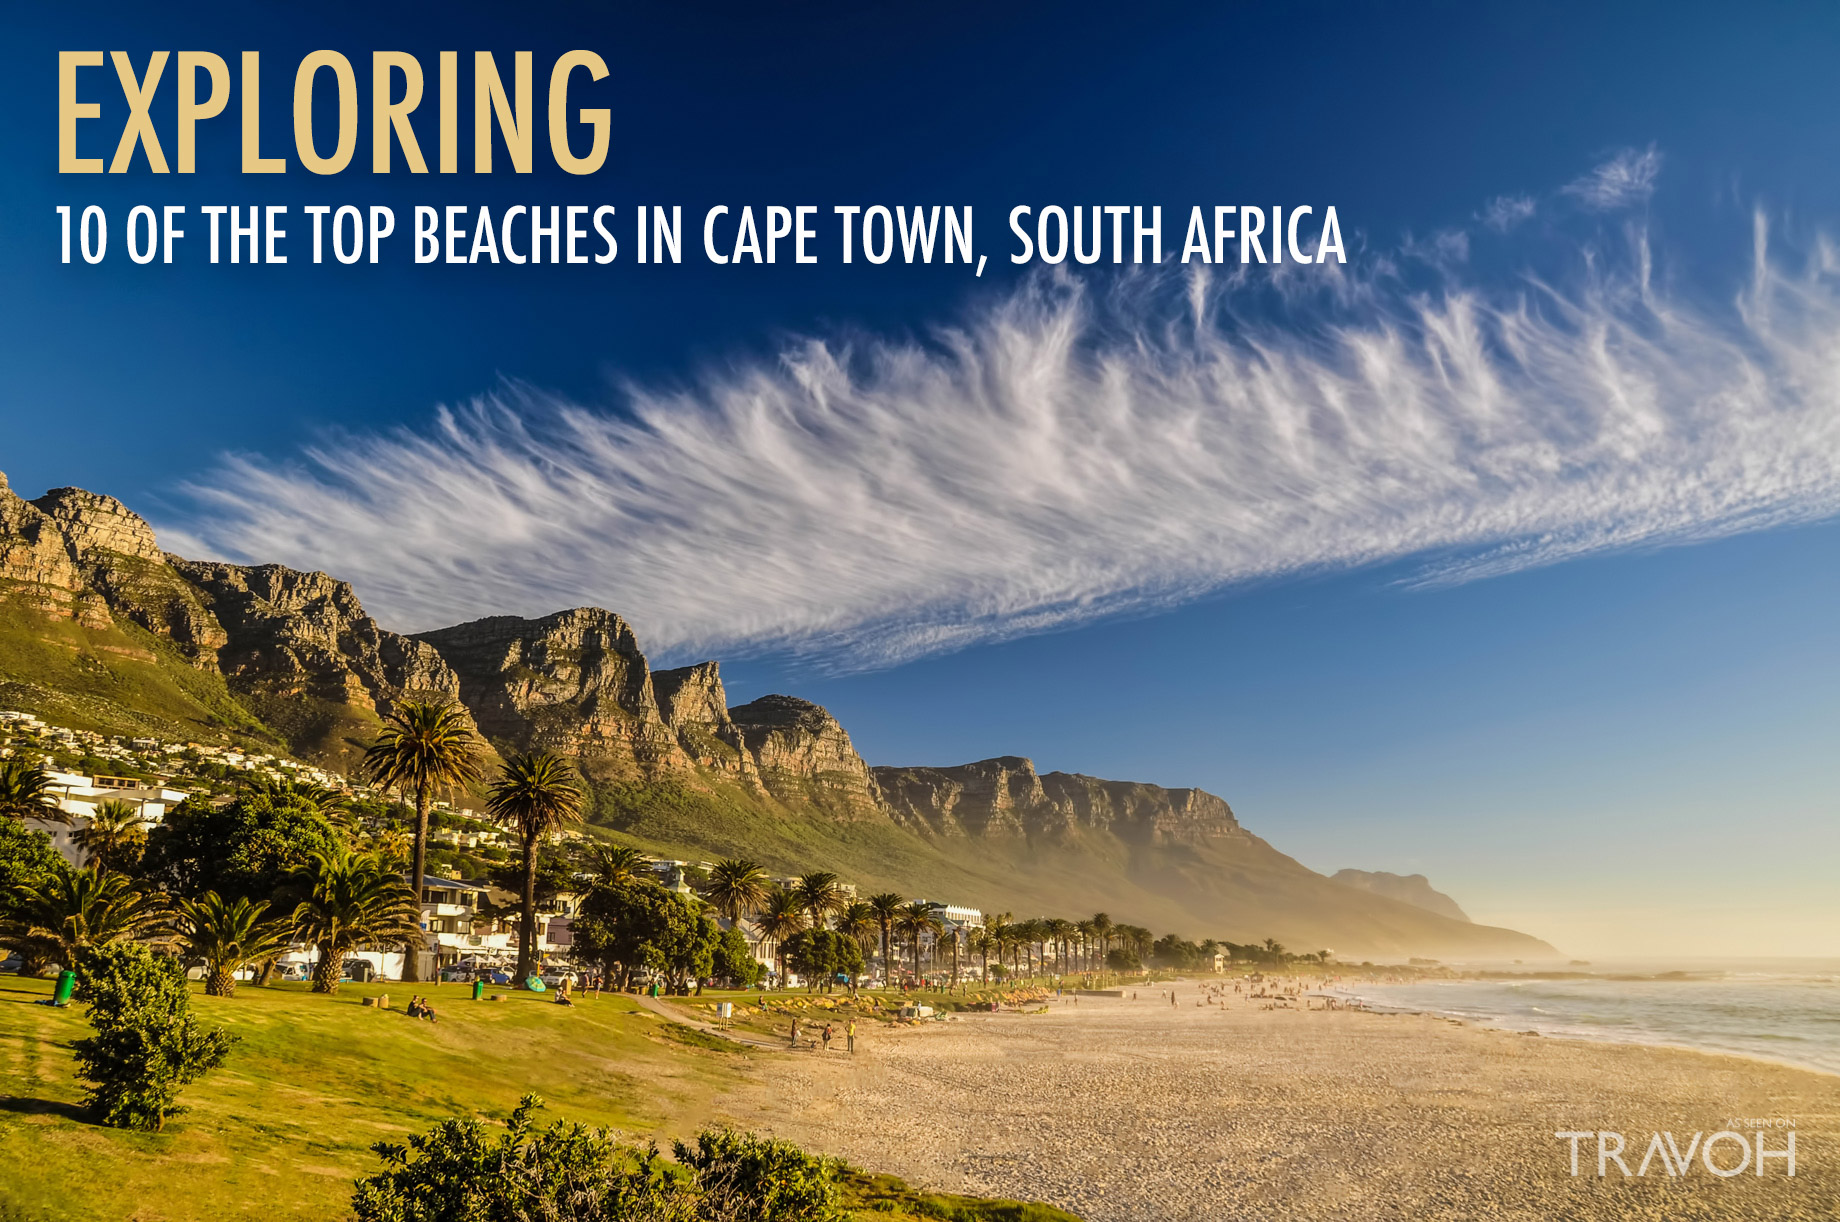 Exploring 10 of the Top Beaches in Cape Town, South Africa